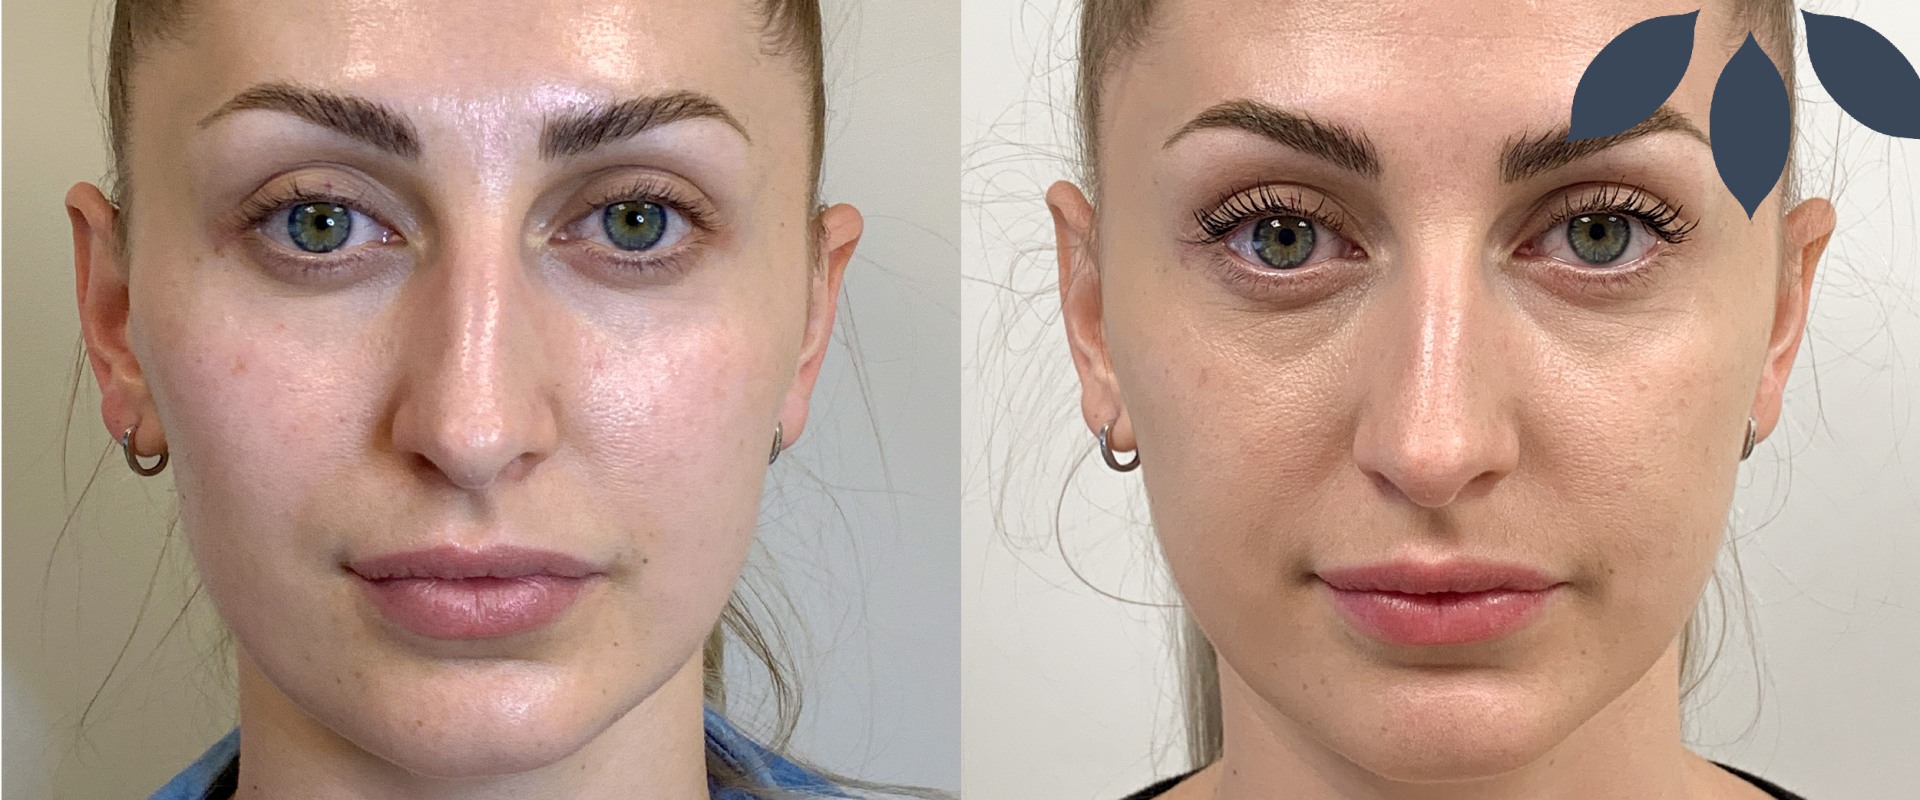 What Happens to Your Face When Fillers Wear Off?